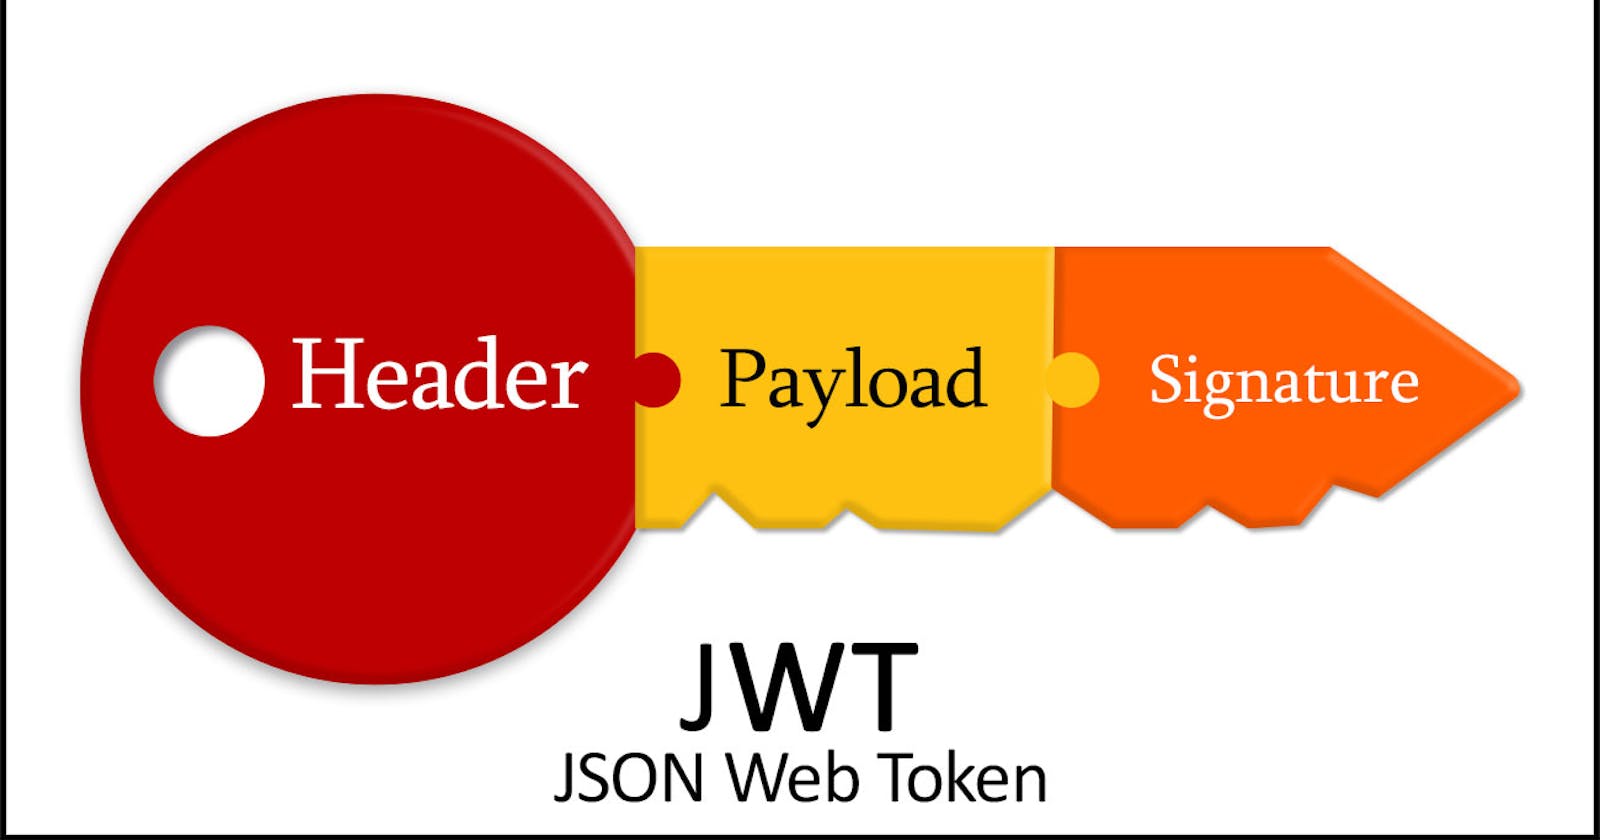 A journey to JSON Web Token